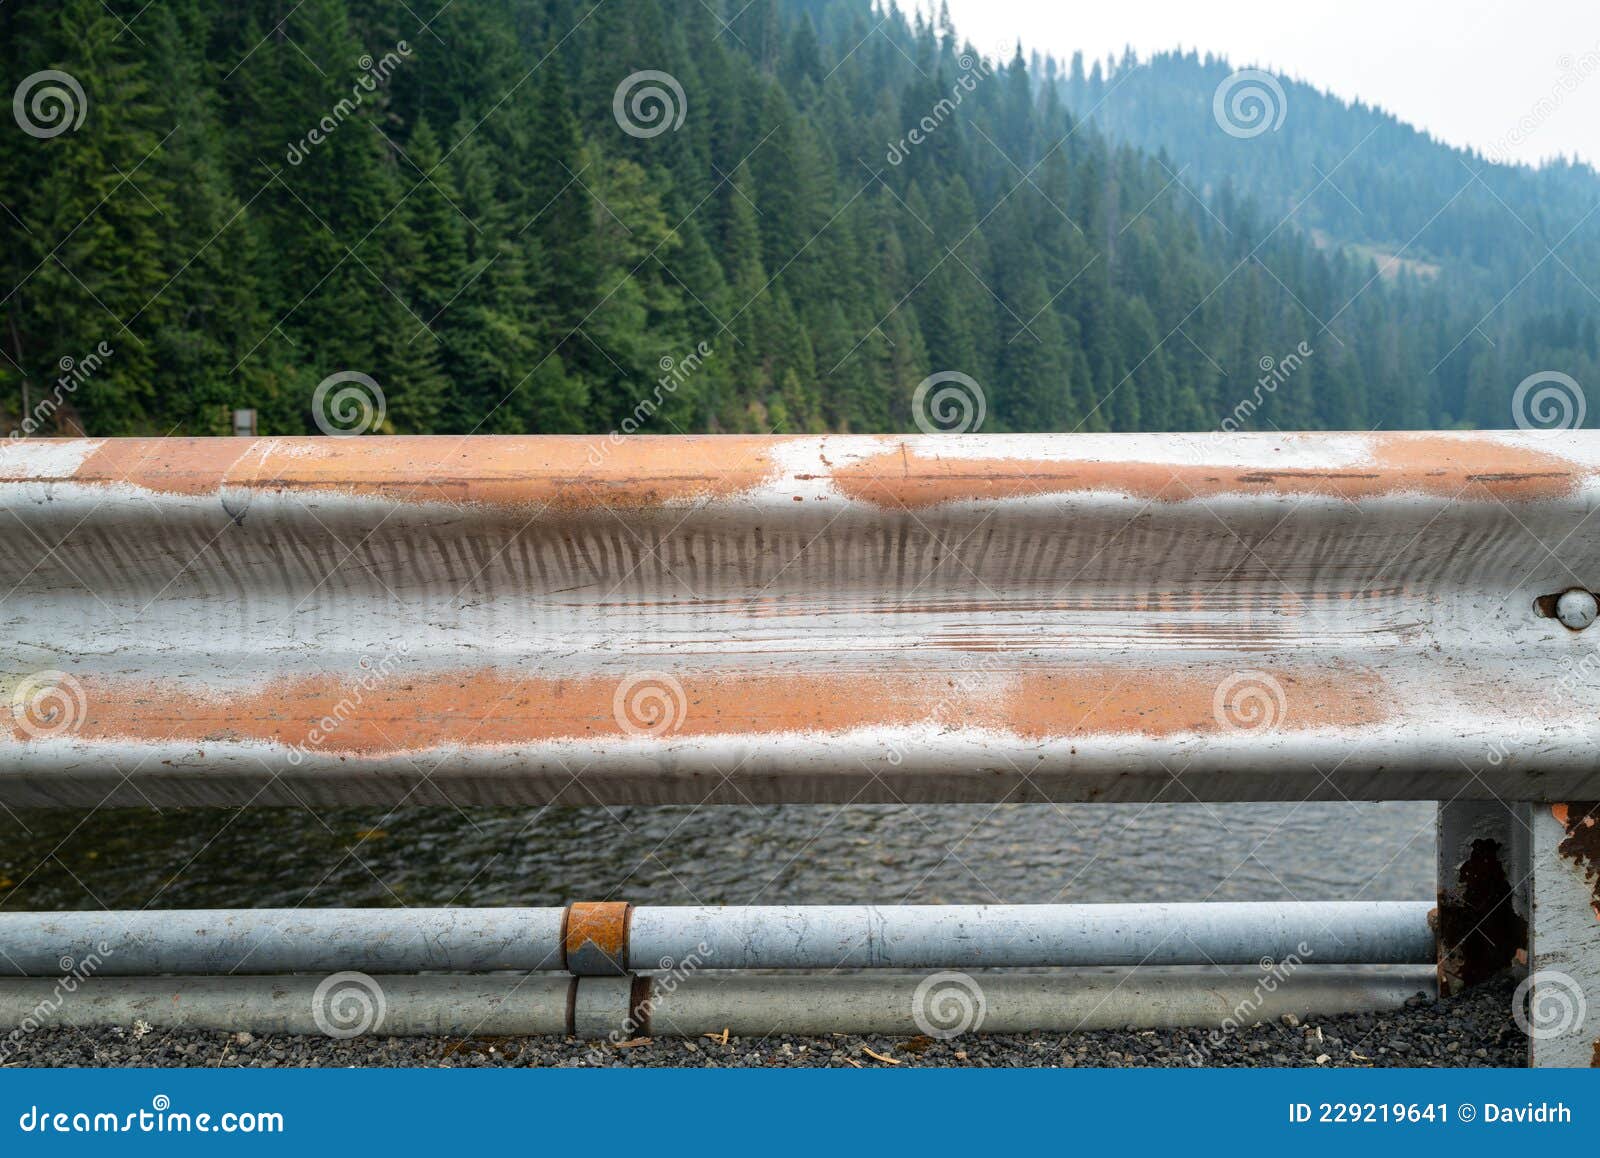 detail of the guardrail and conduits on a bridge over the selway river near lowell, idaho, usa